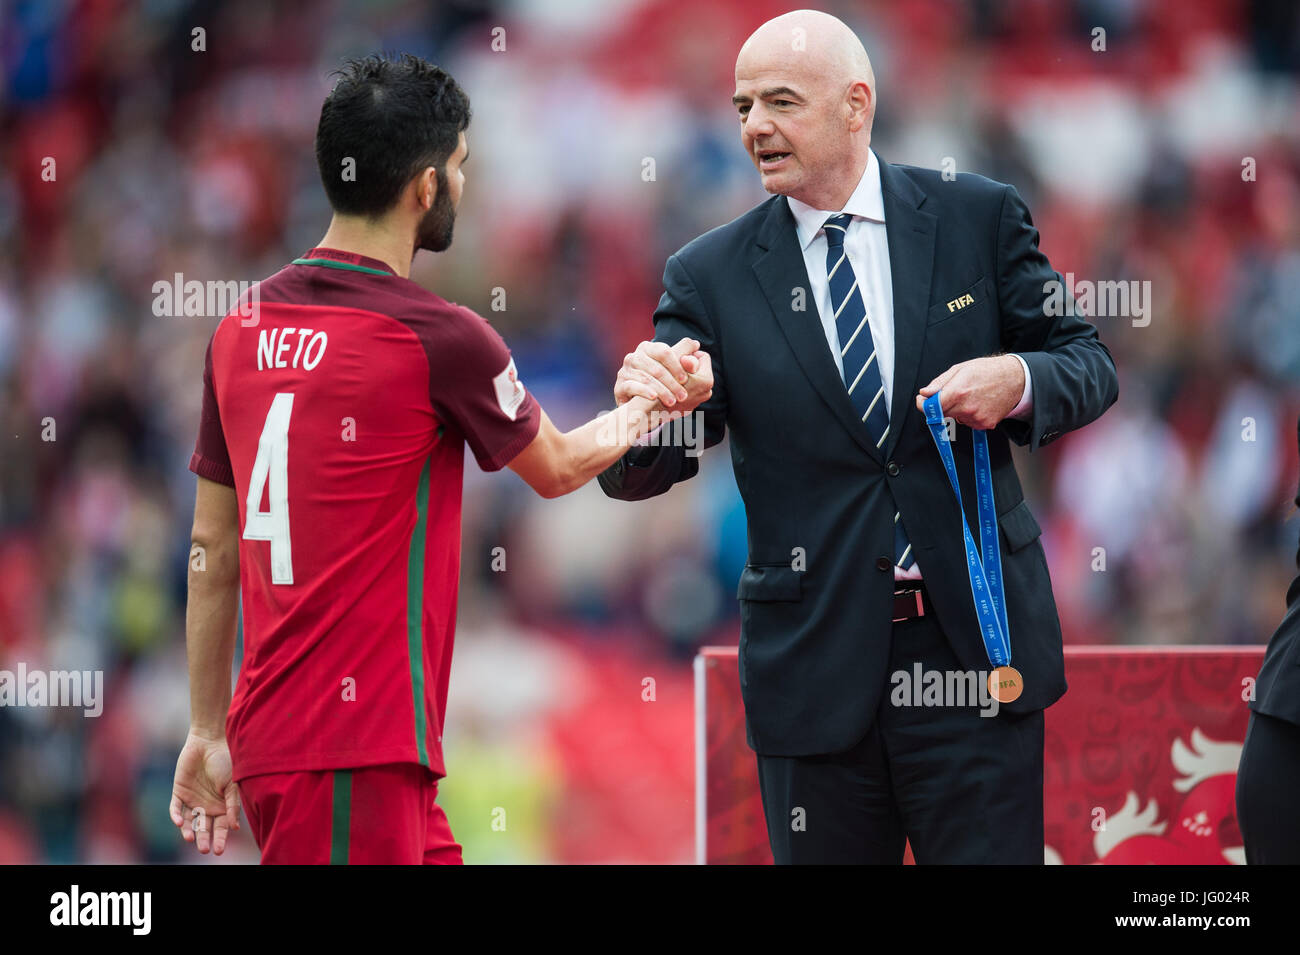 Moscow, Russia. 2nd July, 2017. President of FIFA Gianni Infantino (R) celebrates Luis Neto of Portugal with a bronze medal after the bronze match of Confederations Cup-2017 in Moscow, Russia, on July 2, 2017. Credit: Evgeny Sinitsyn/Xinhua/Alamy Live News Stock Photo